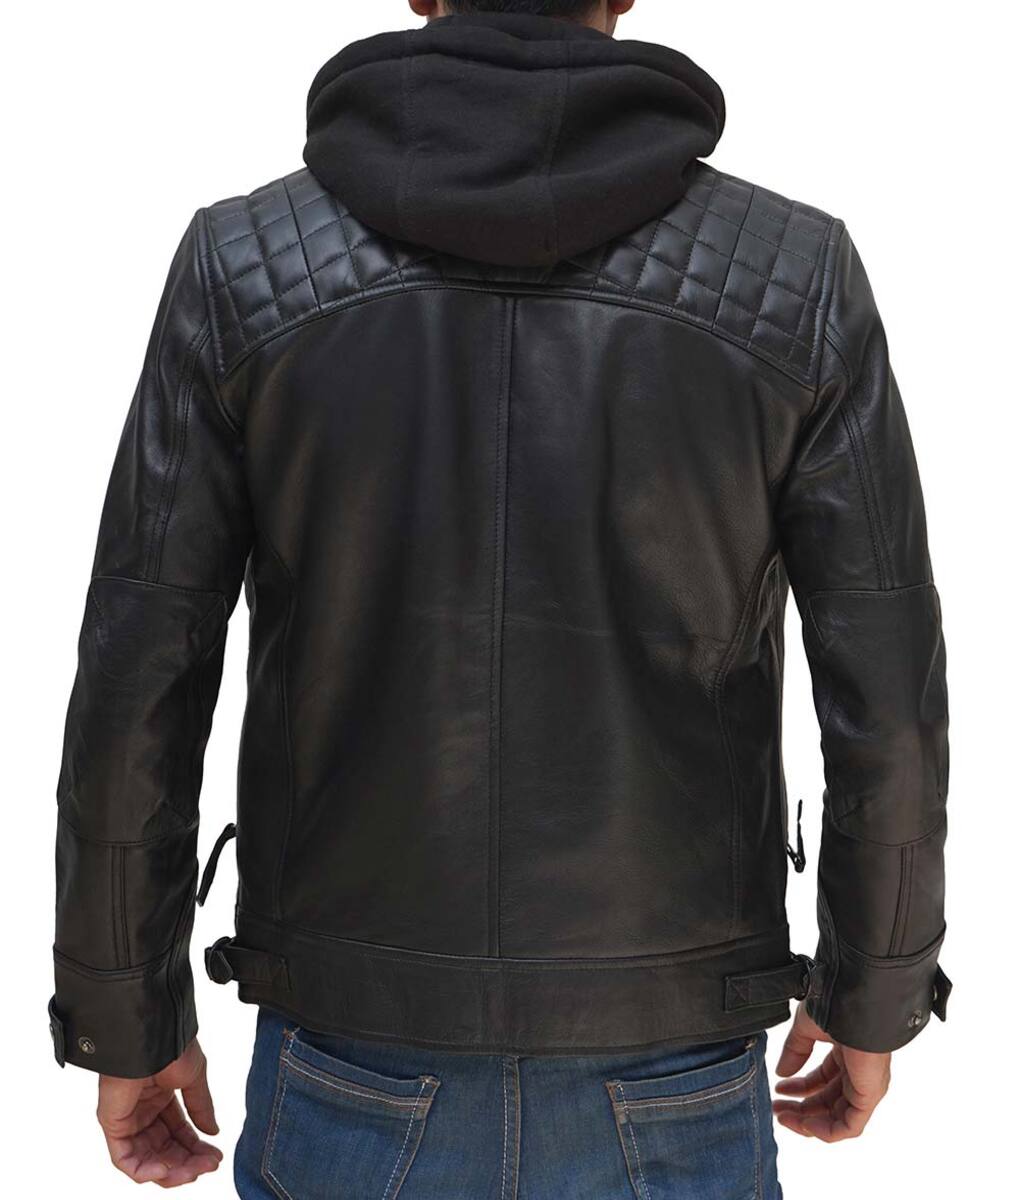 Mens_Black_leather_jacket_with_hood